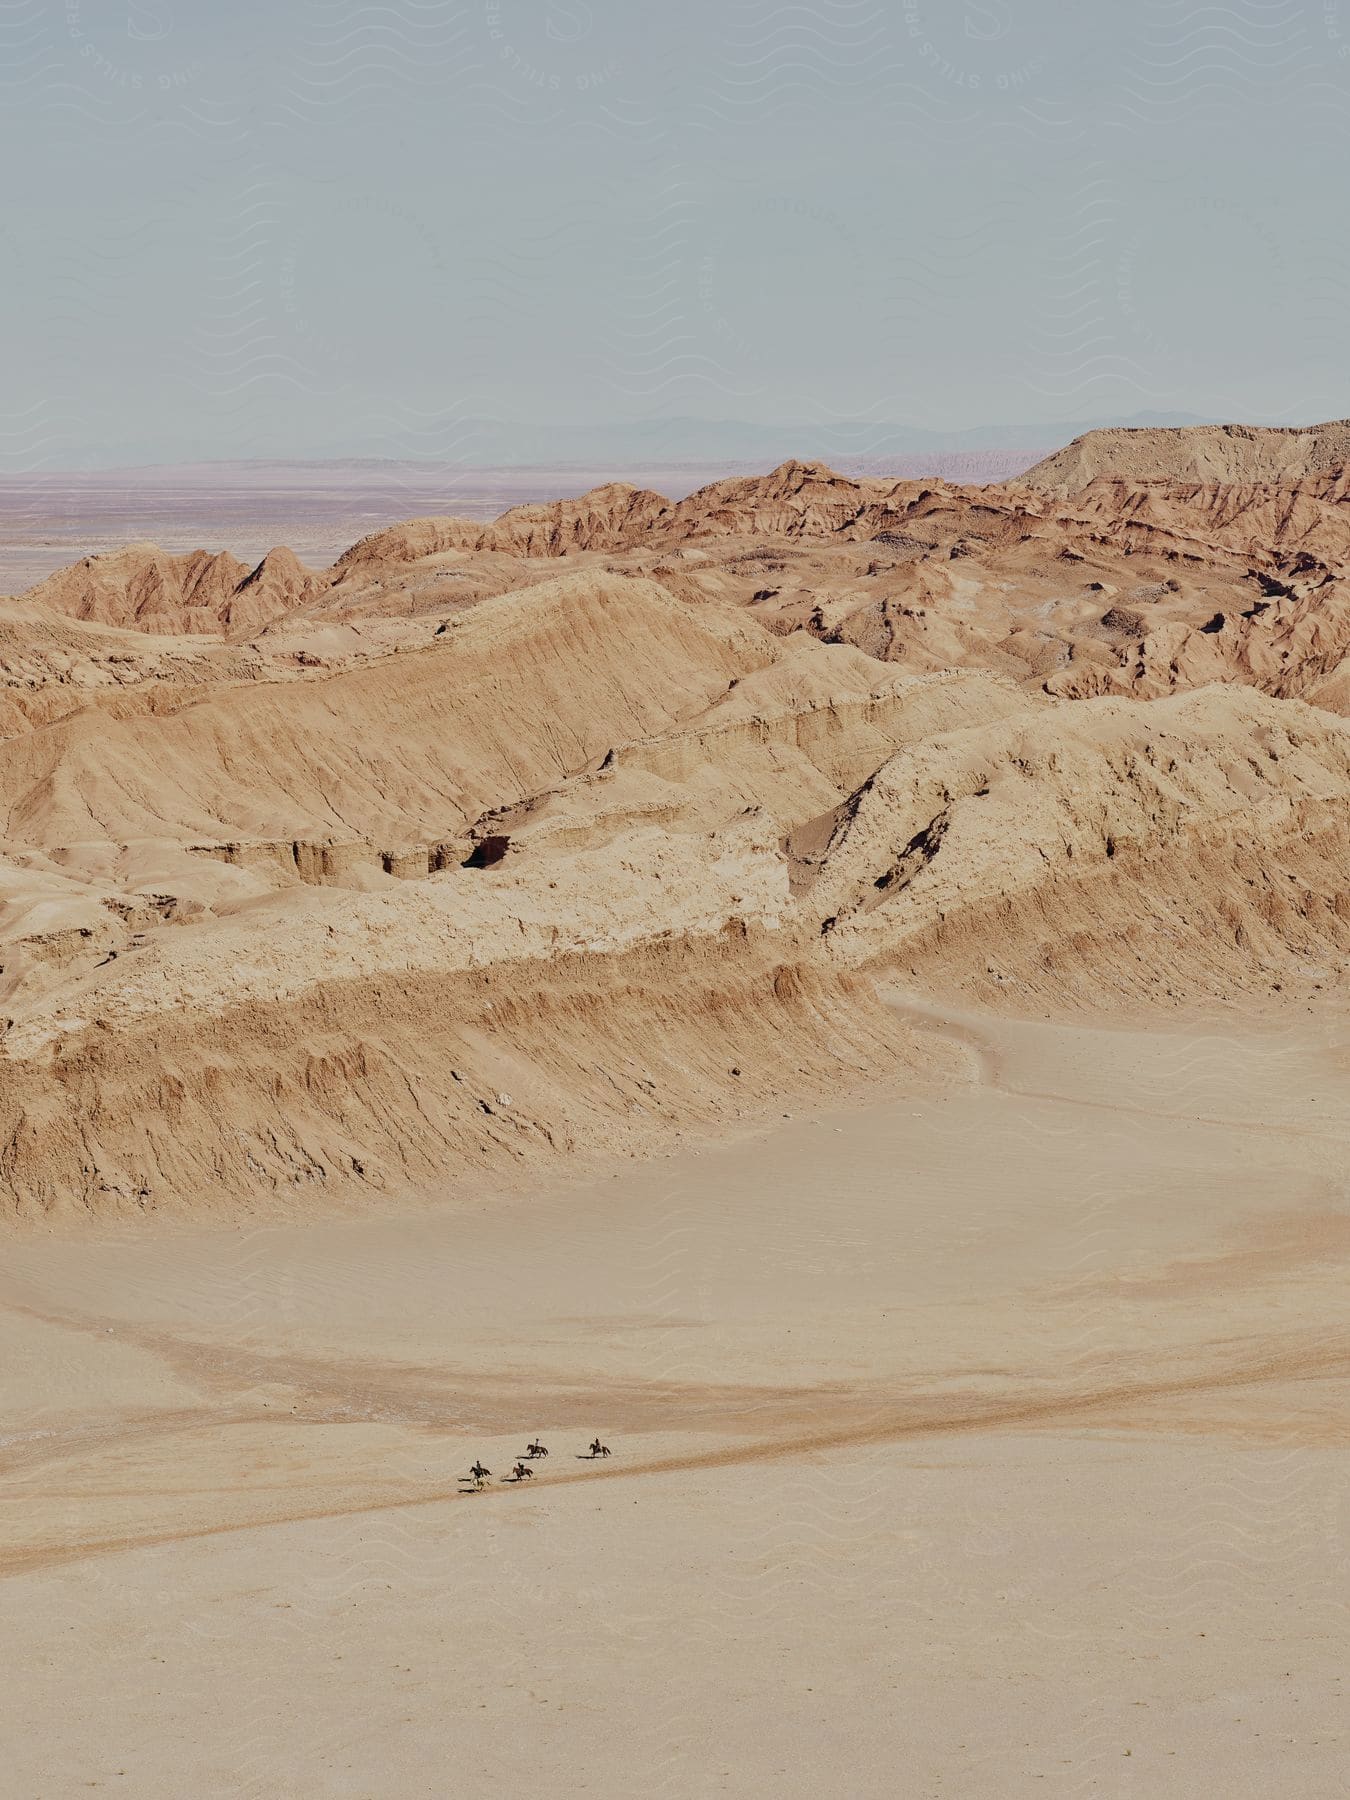 Canyons snake through mountain terrain in the middle of a hazy arid plain